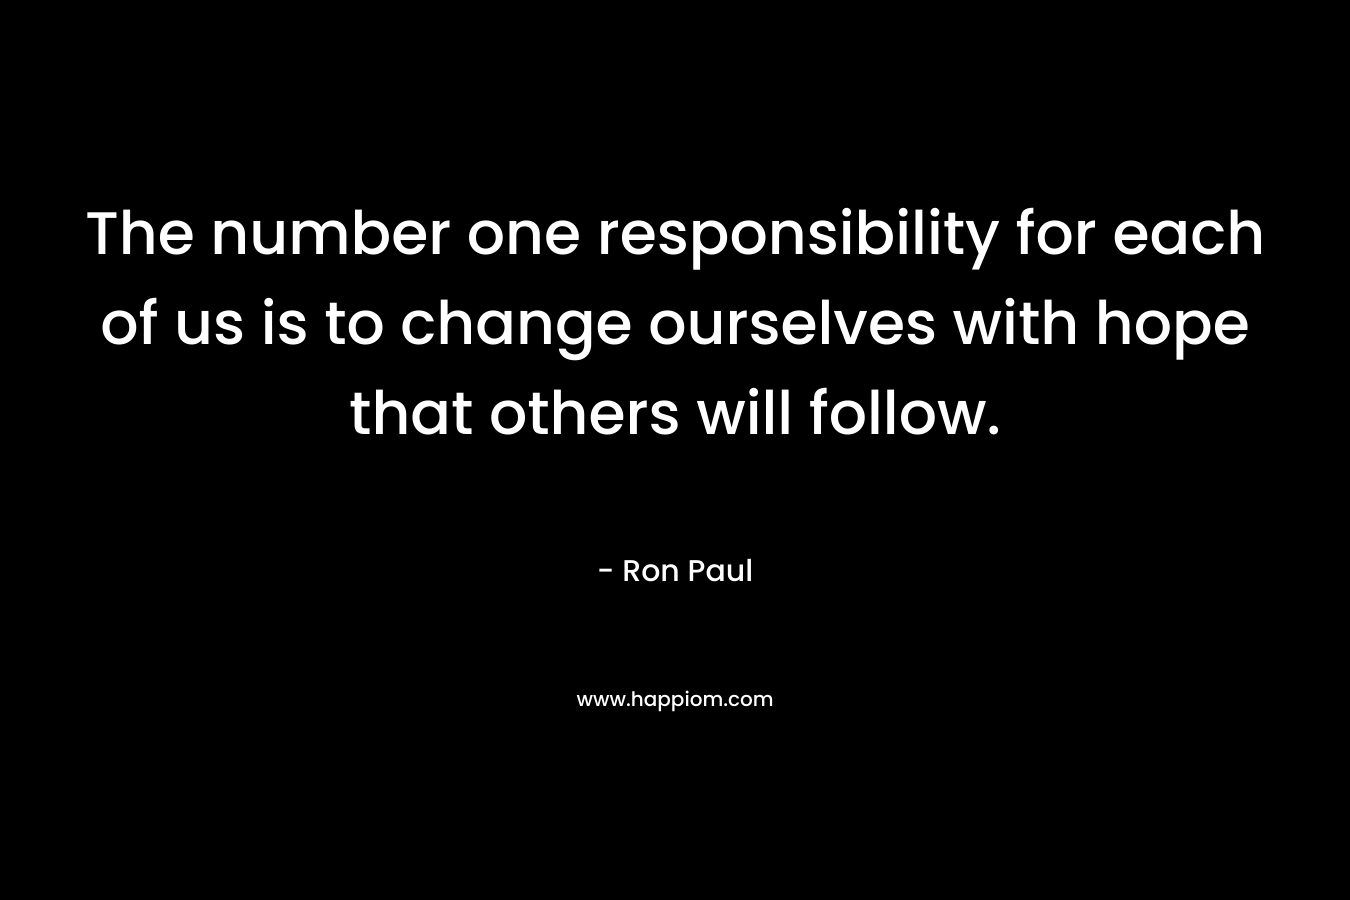 The number one responsibility for each of us is to change ourselves with hope that others will follow. – Ron Paul